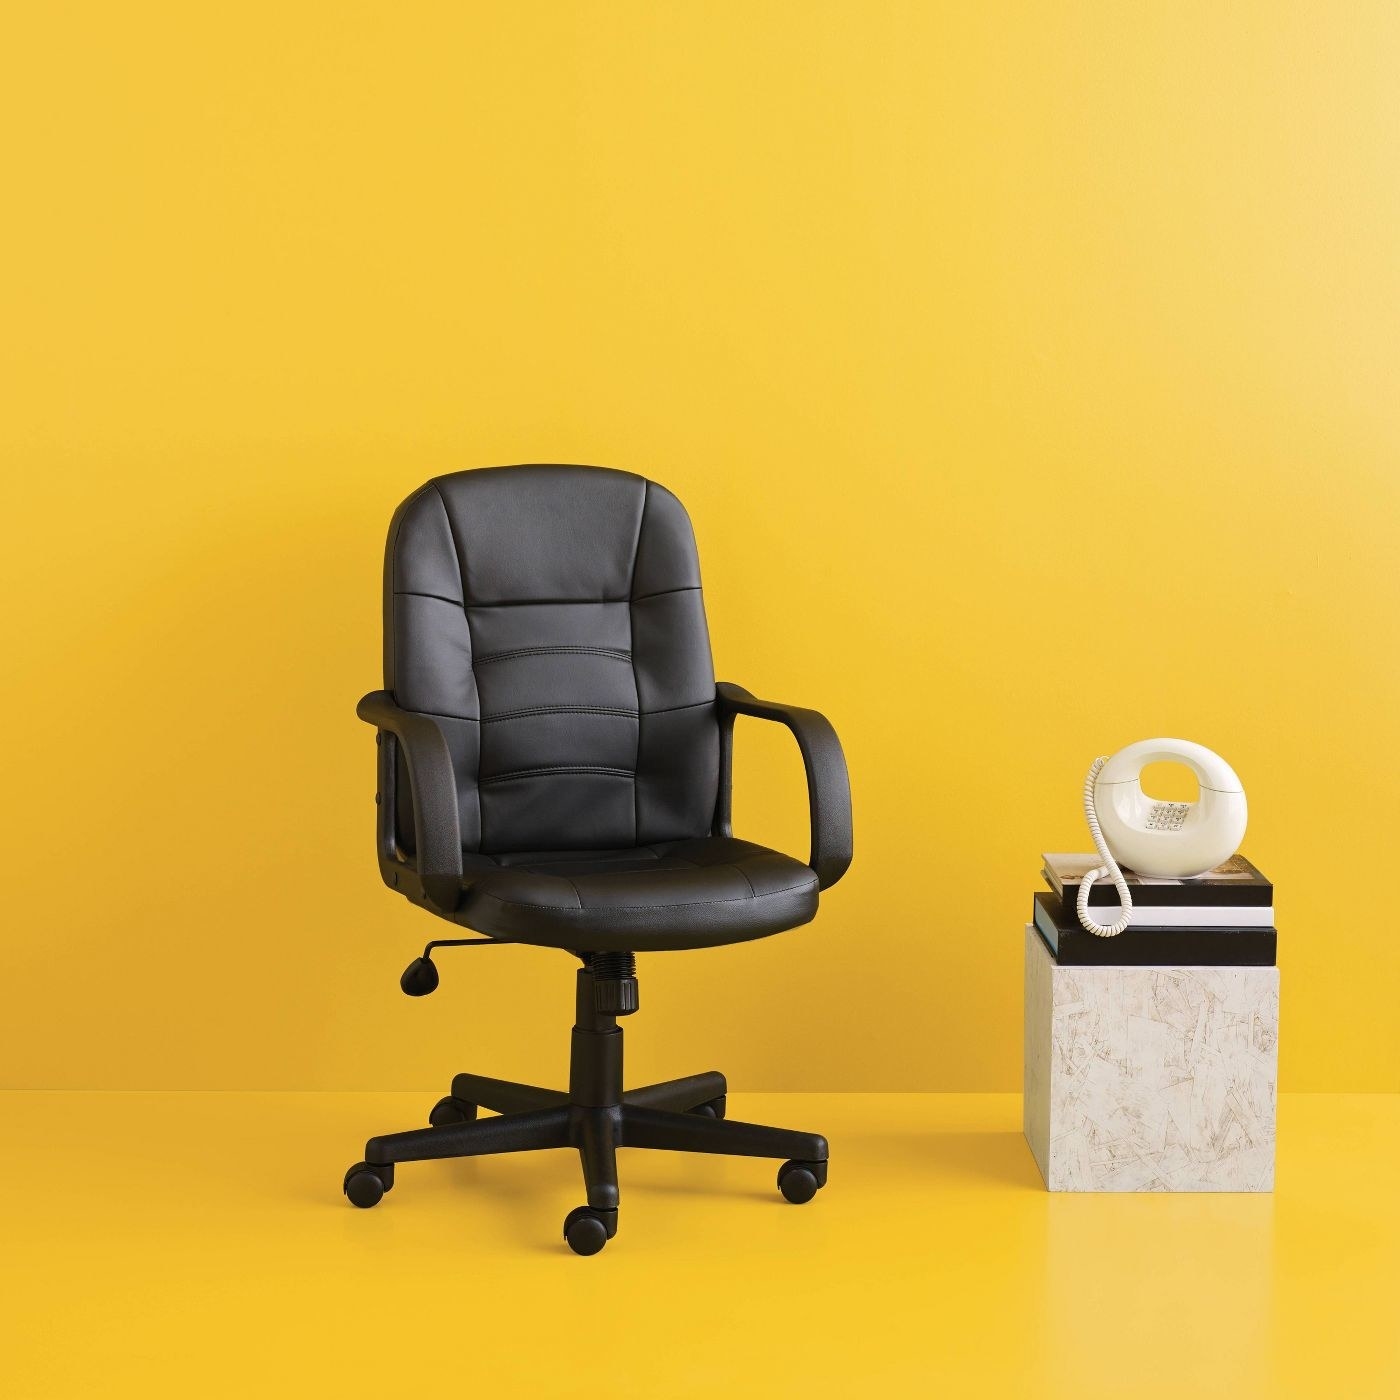 A black leather swivel office chair on a yellow backdrop